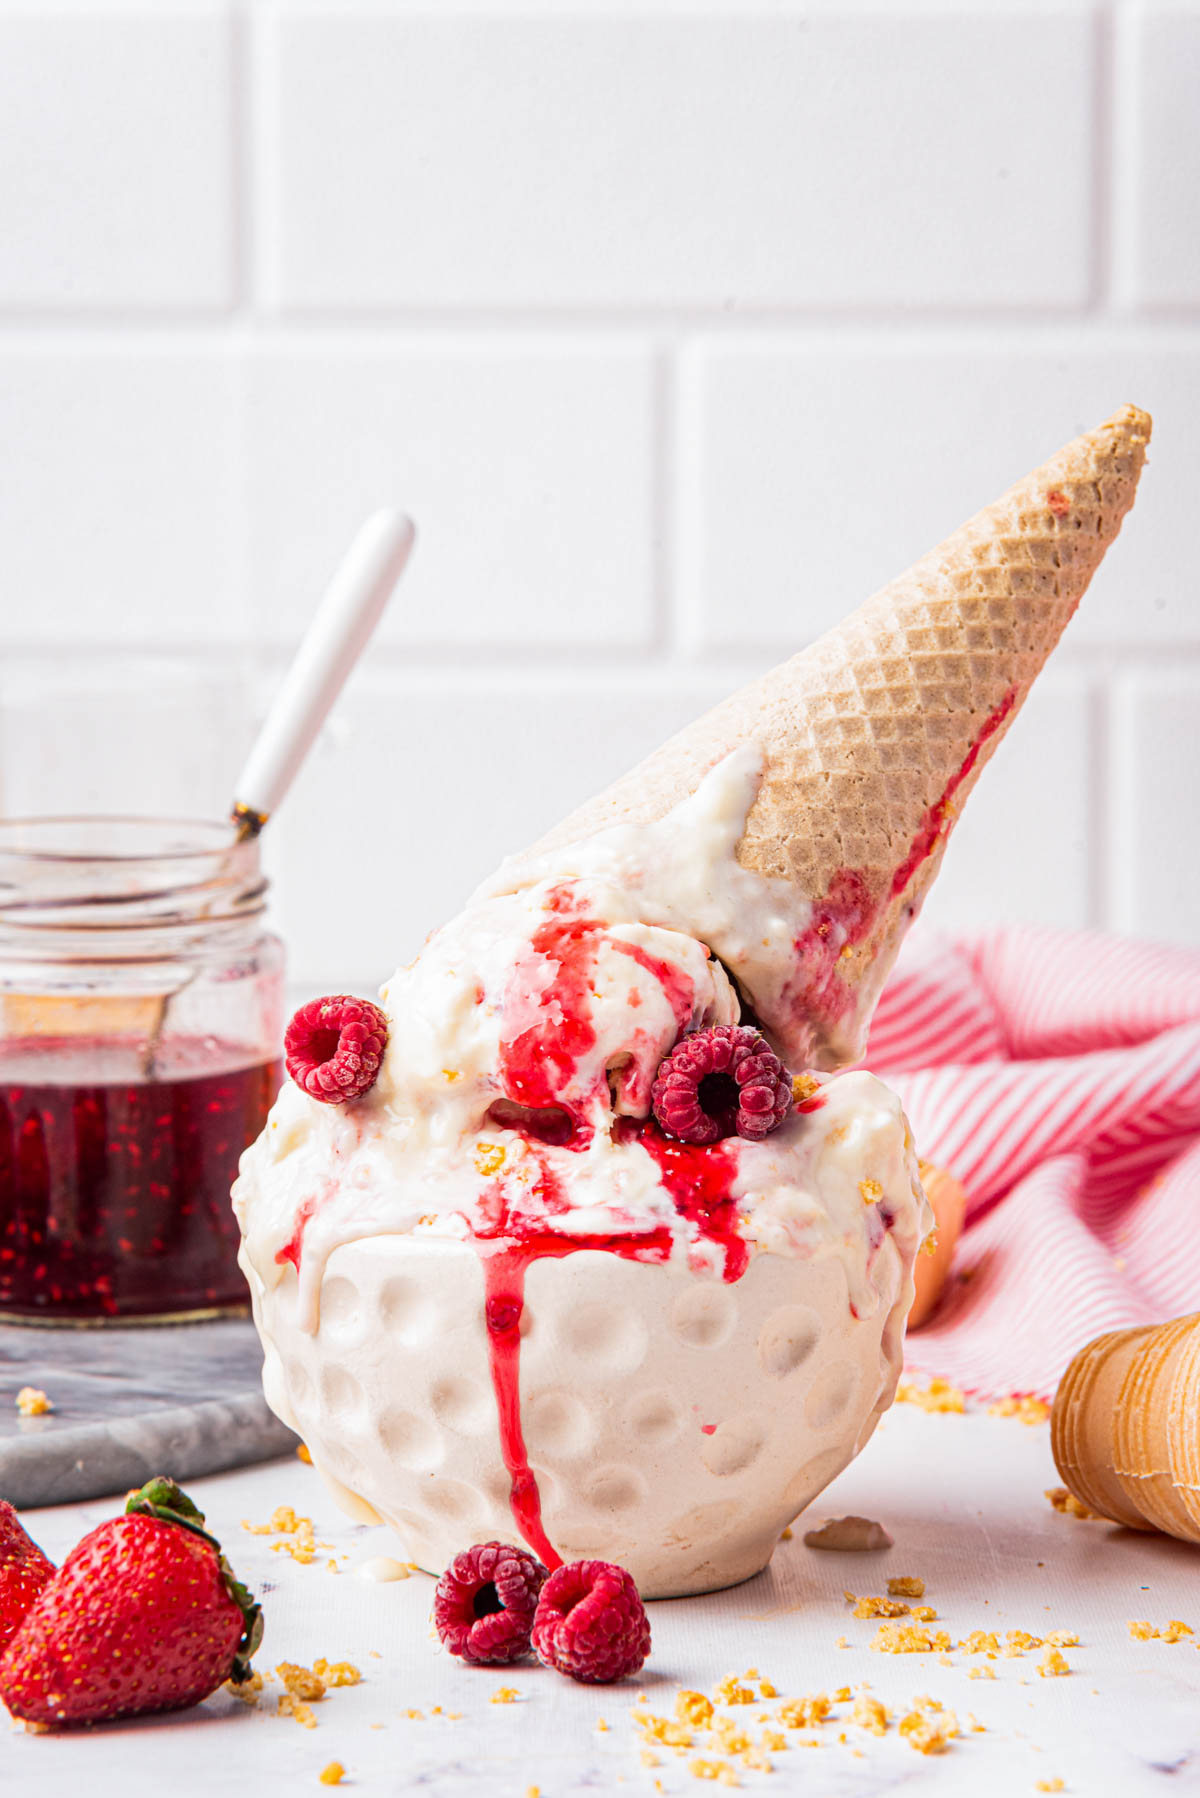 Ice cream overflowing from a cone, topped with raspberries and graham cracker crumbs, with strawberries and a striped napkin nearby.